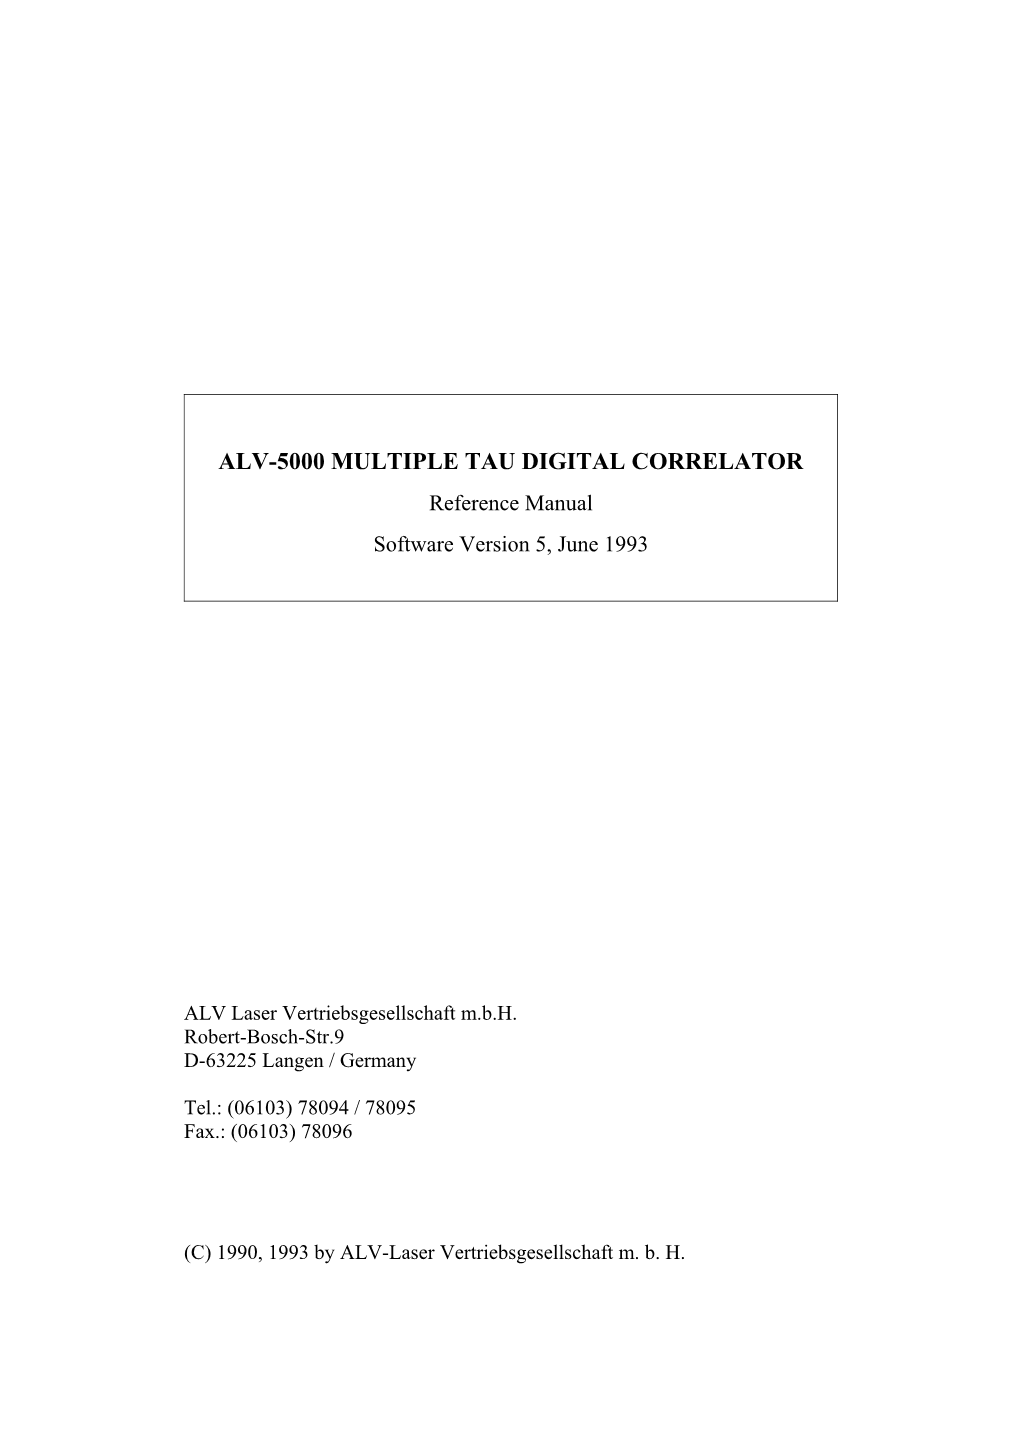 ALV-5000 Reference Manual